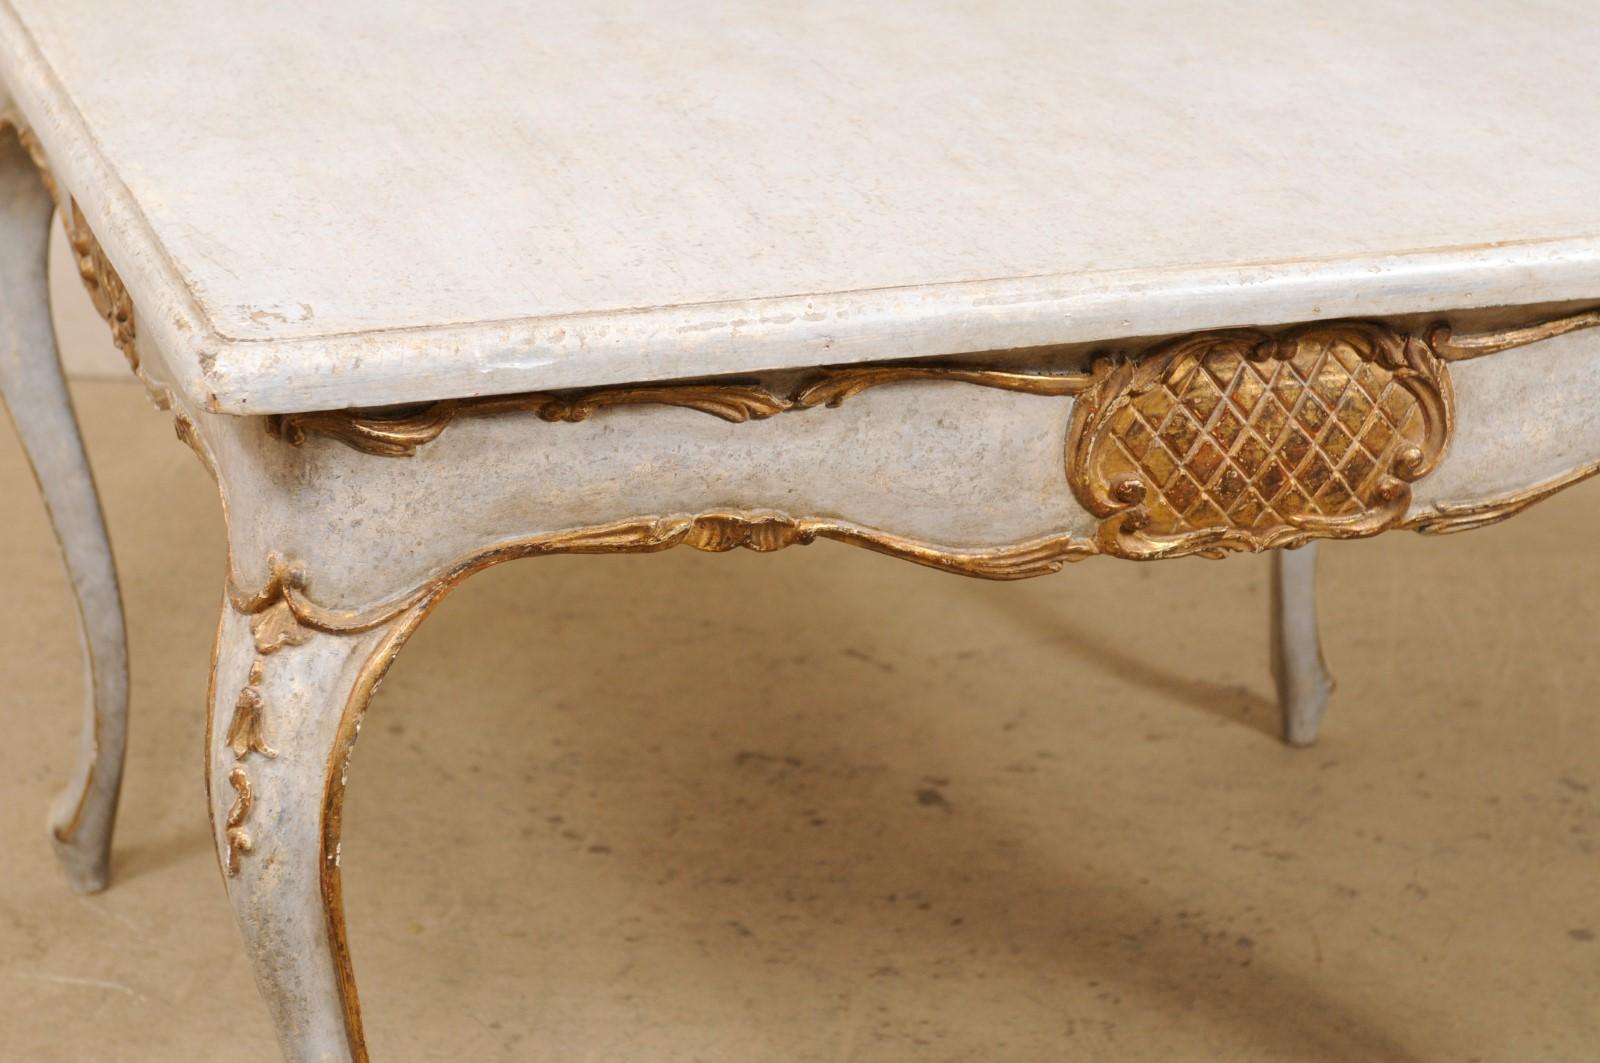 Italian Square-Shaped Wood Table w/ Elegant Legs, Scalloped Skirt & Gilt Accents For Sale 4